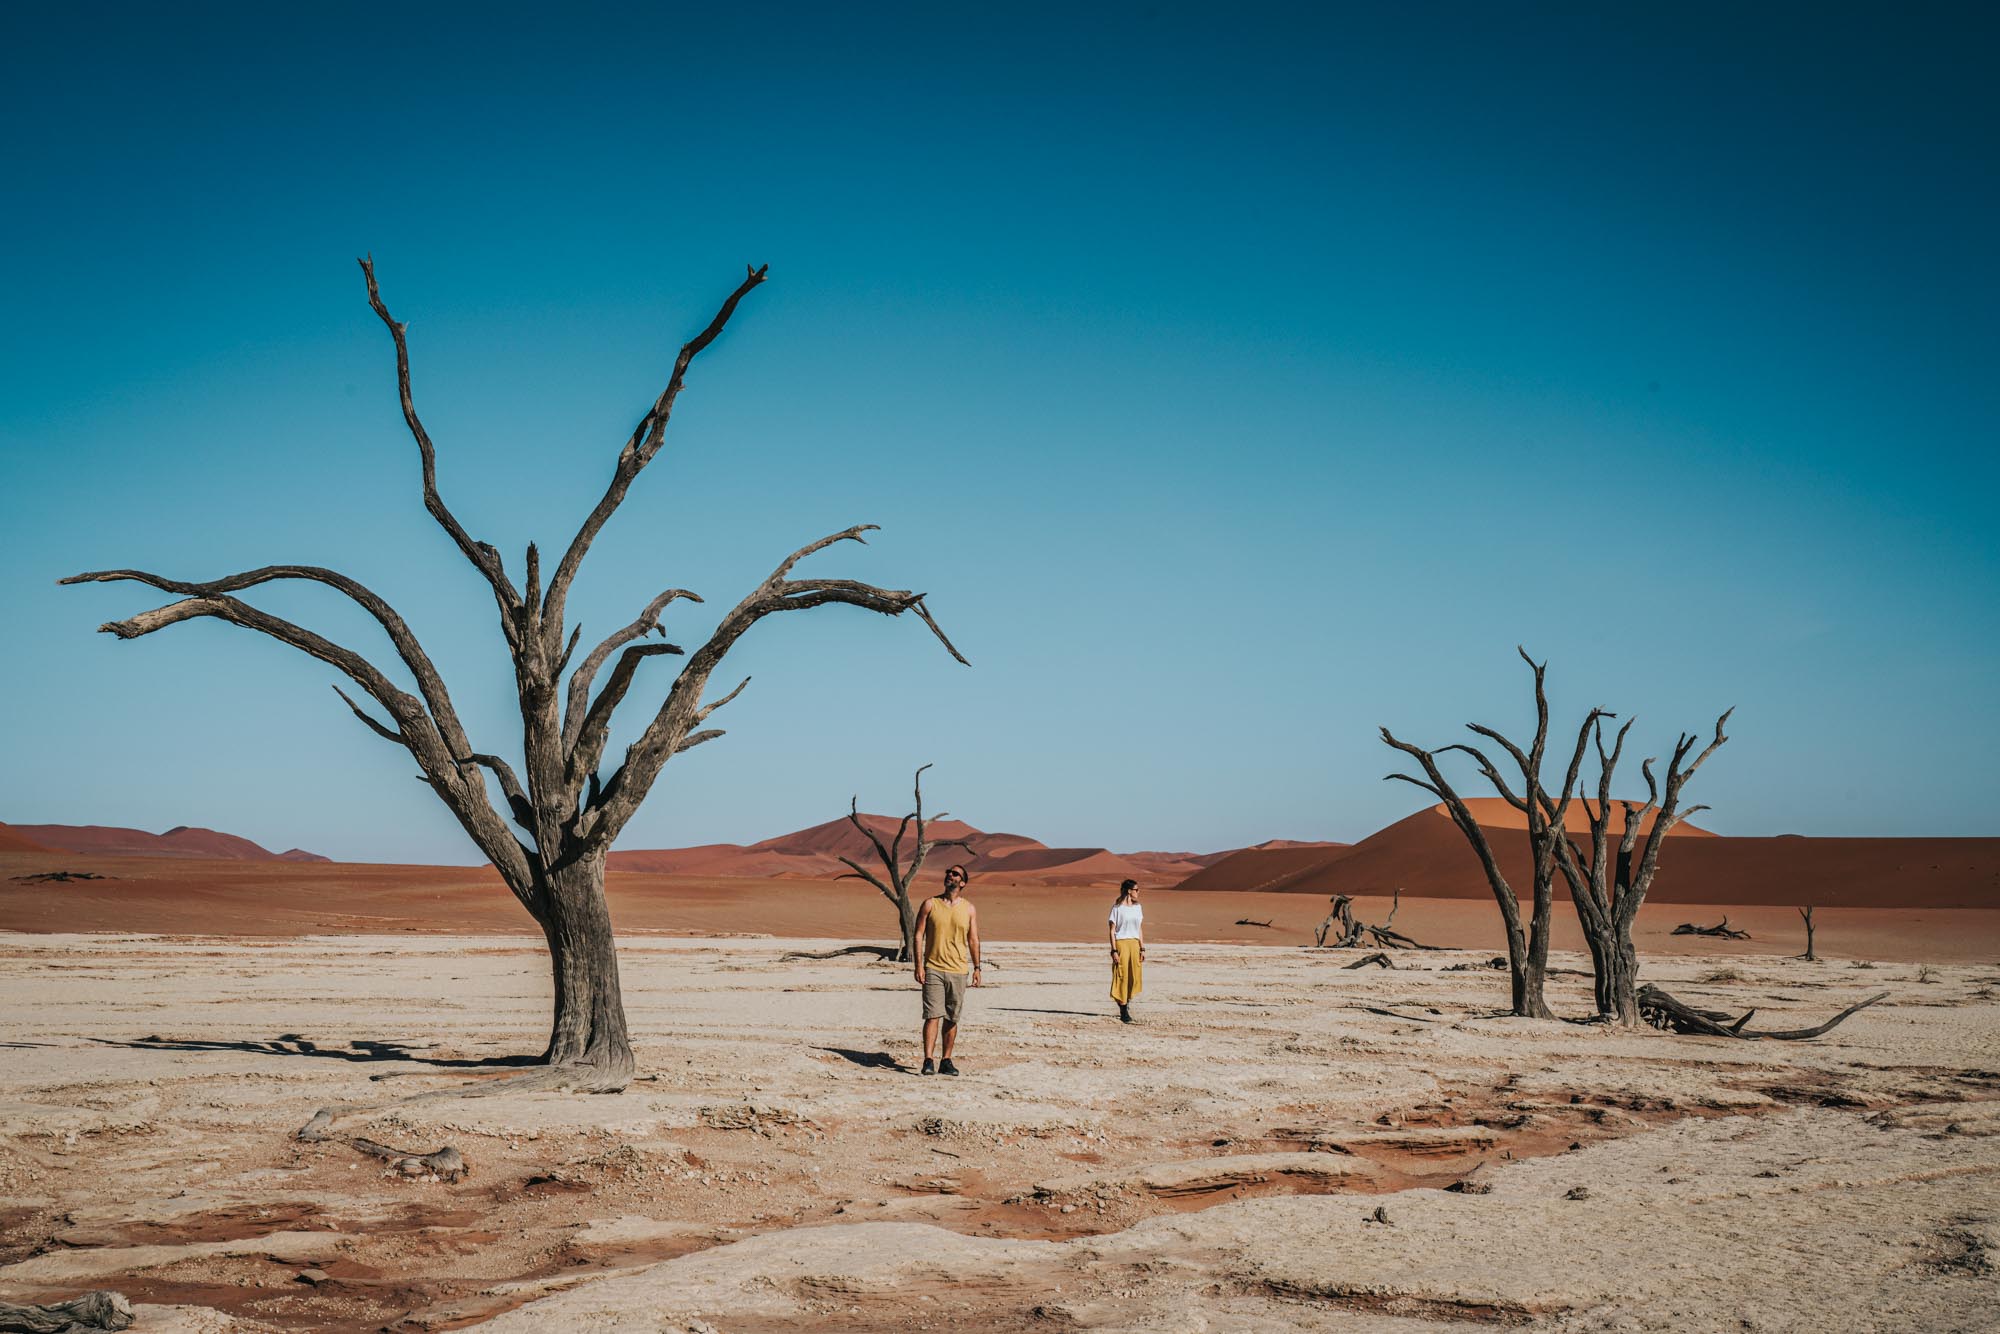 Guide to Visiting Deadvlei & Sossusvlei, Namibia: Things to Do and Important Tips for Your Visit